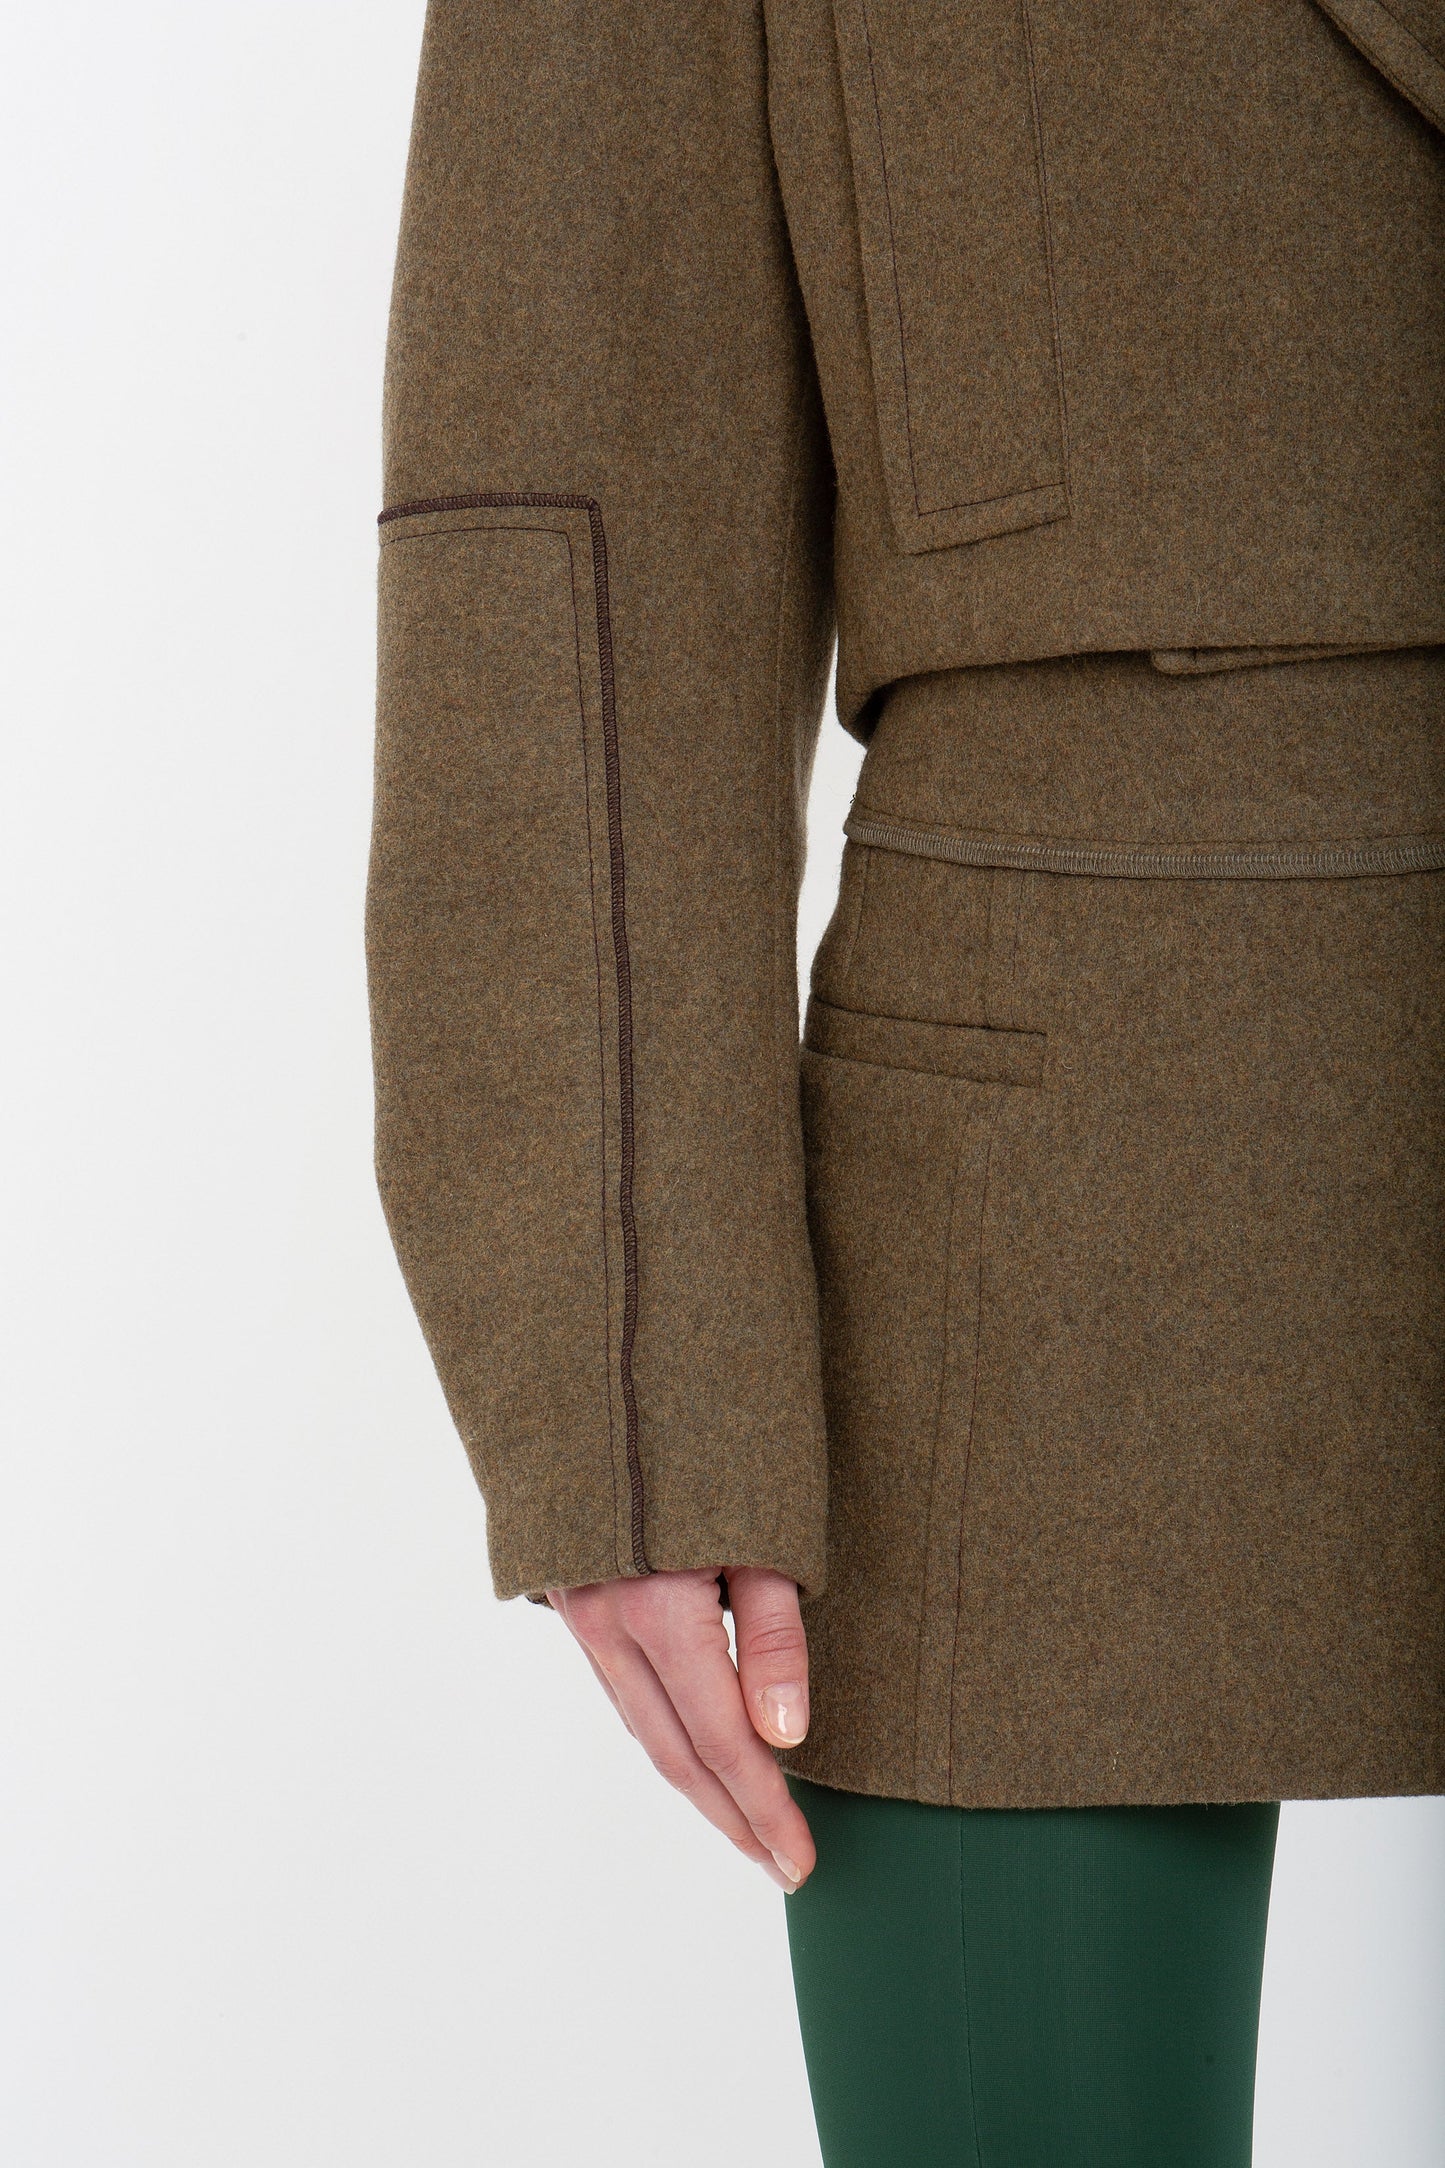 Close-up of a person wearing a Tailored Mini Skirt In Khaki by Victoria Beckham and green pants, showing the side seam and pocket detail of the coat, with their left arm resting at their side.